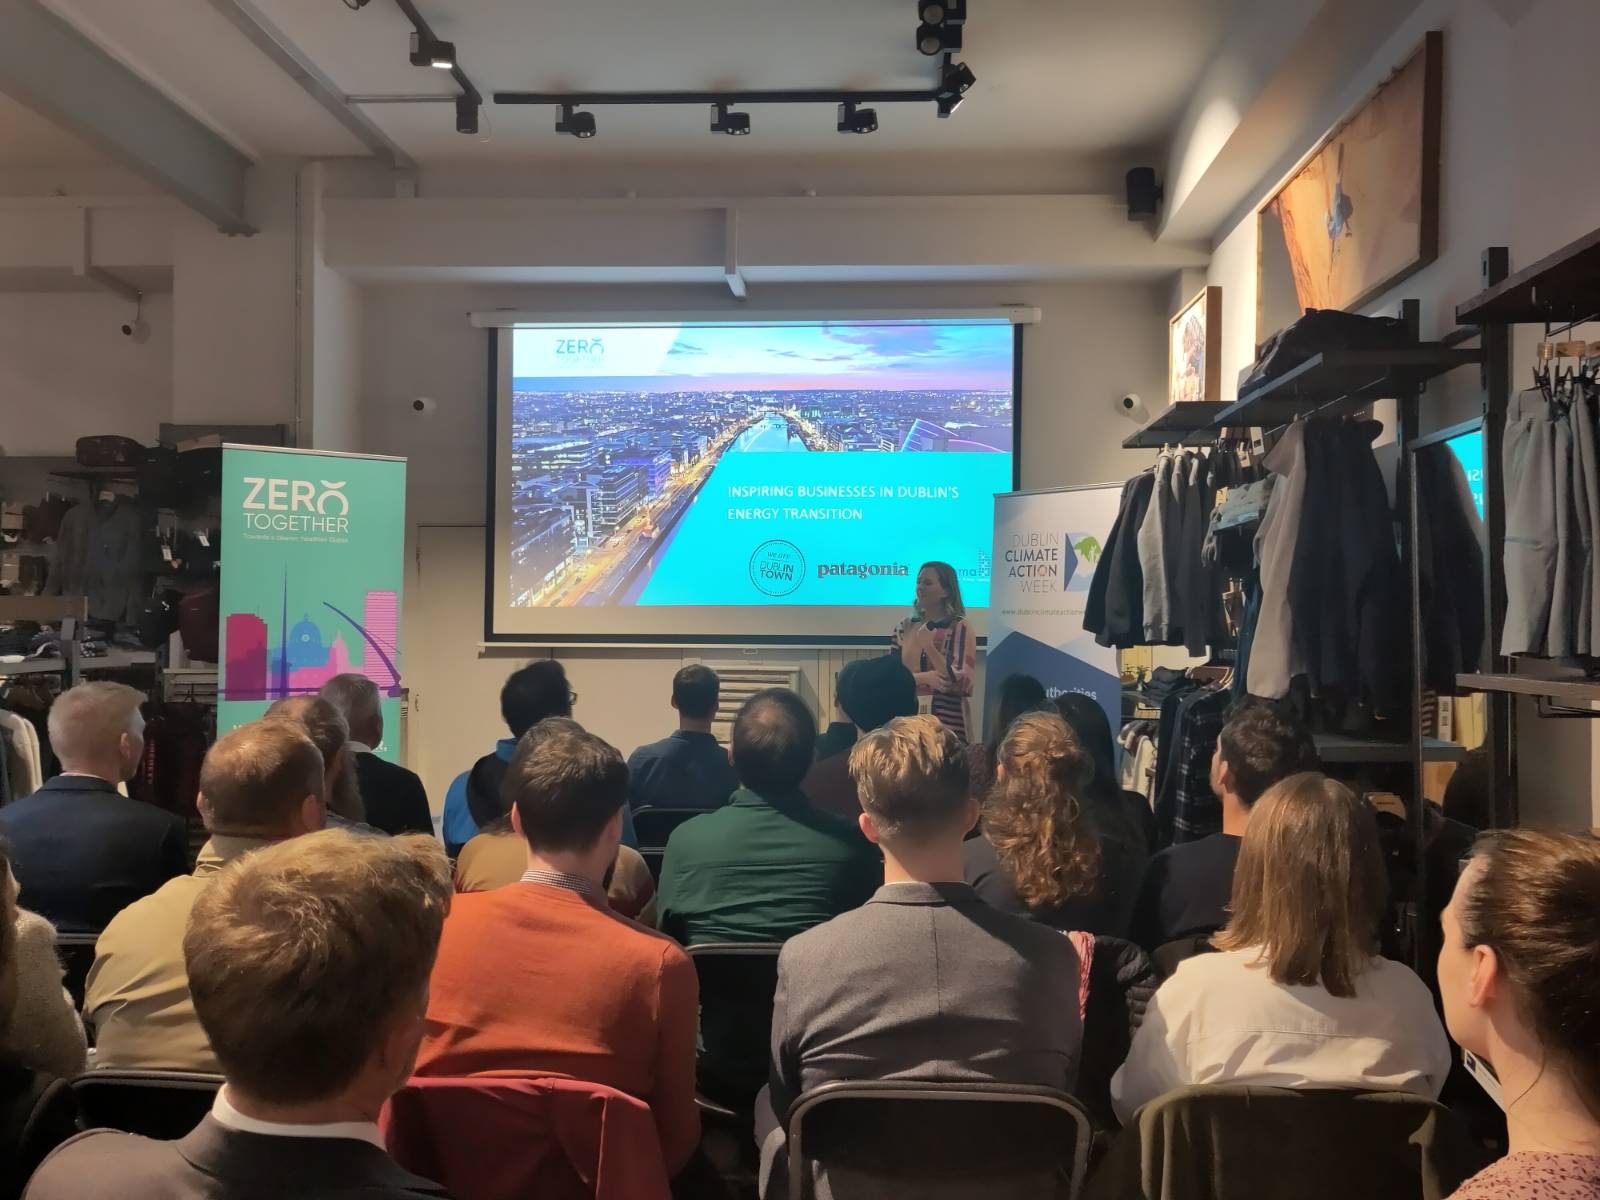 Patagonia and Zero Together Event during Dublin Climate Action Week 2022